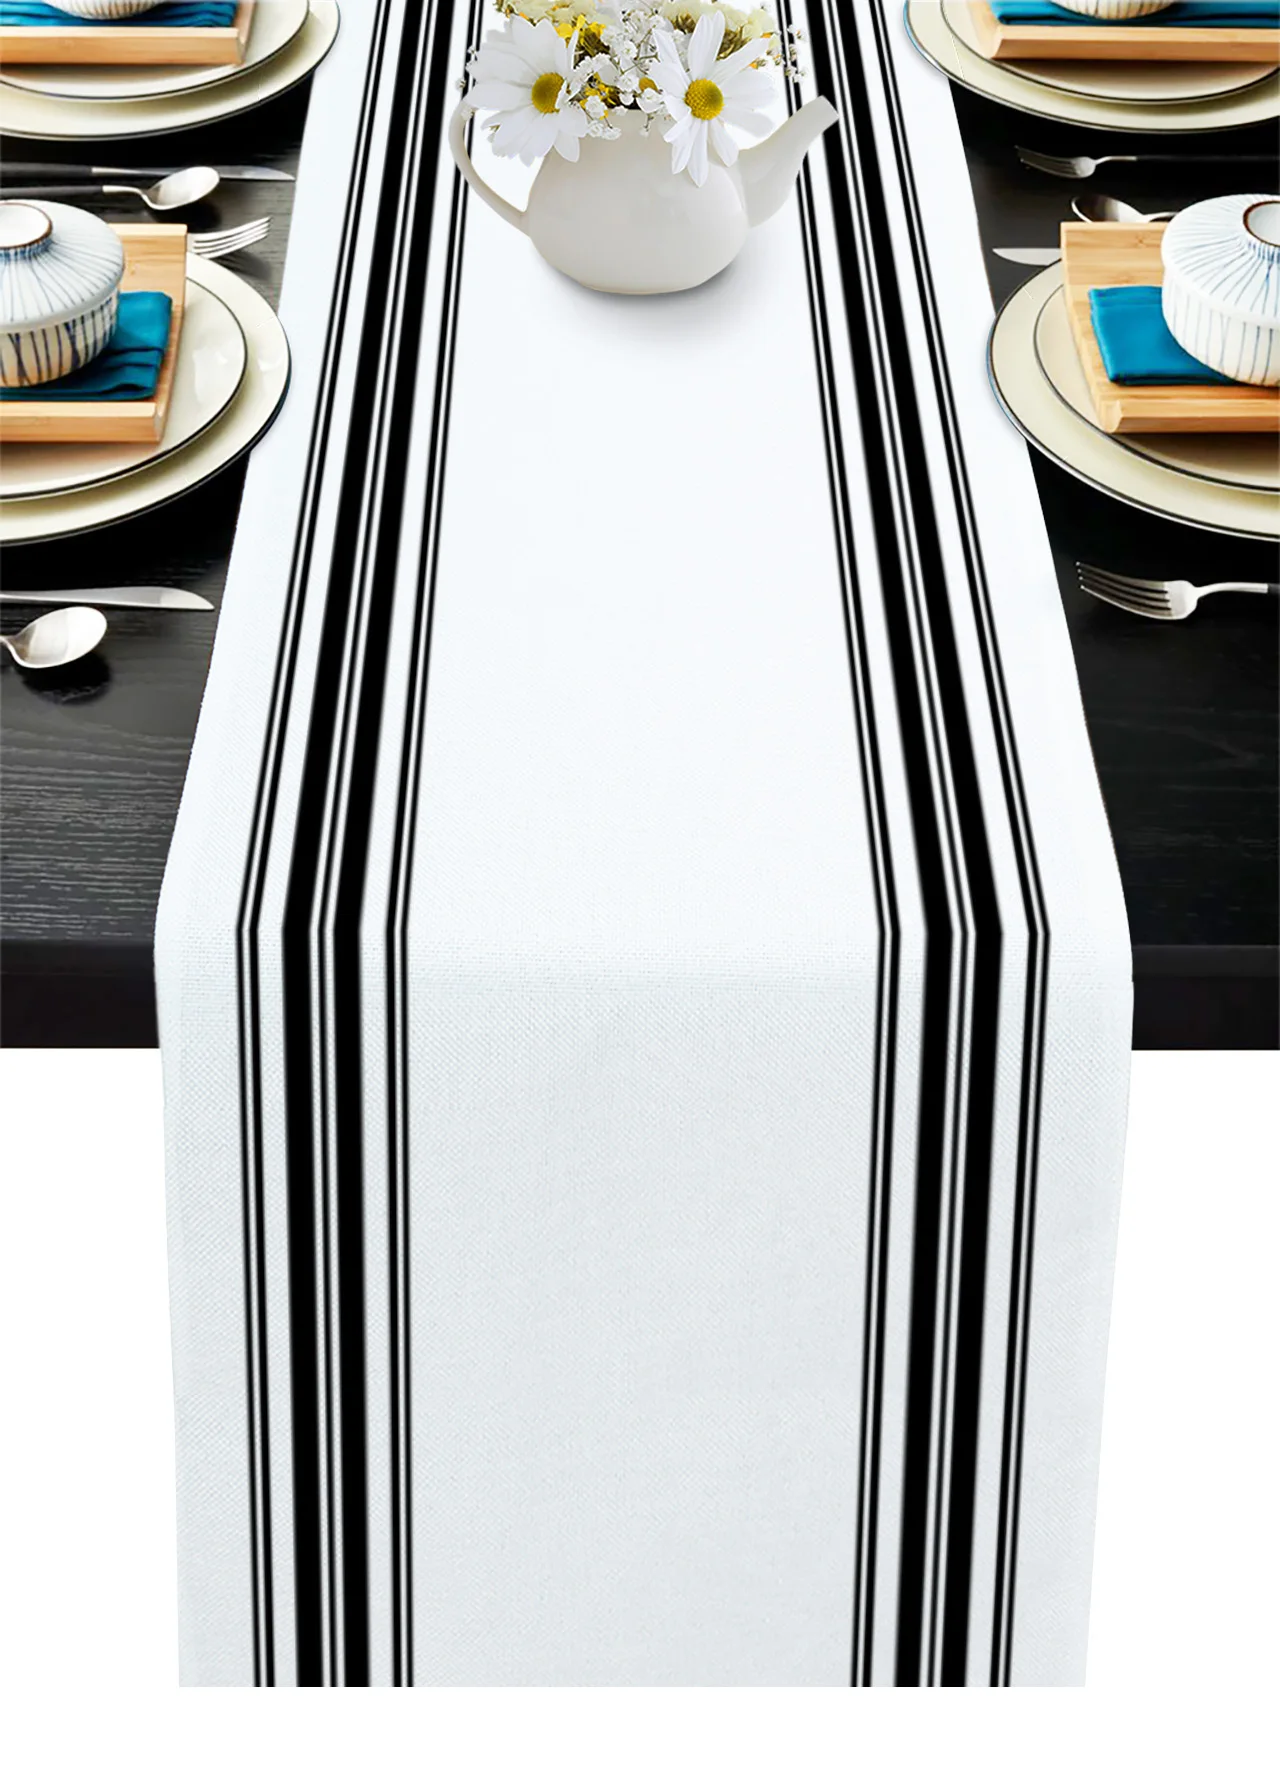 

Farmhouse Stripes Black White Linen Table Runners Kitchen Table Decoration Dining Table Runner Wedding Party Supplies